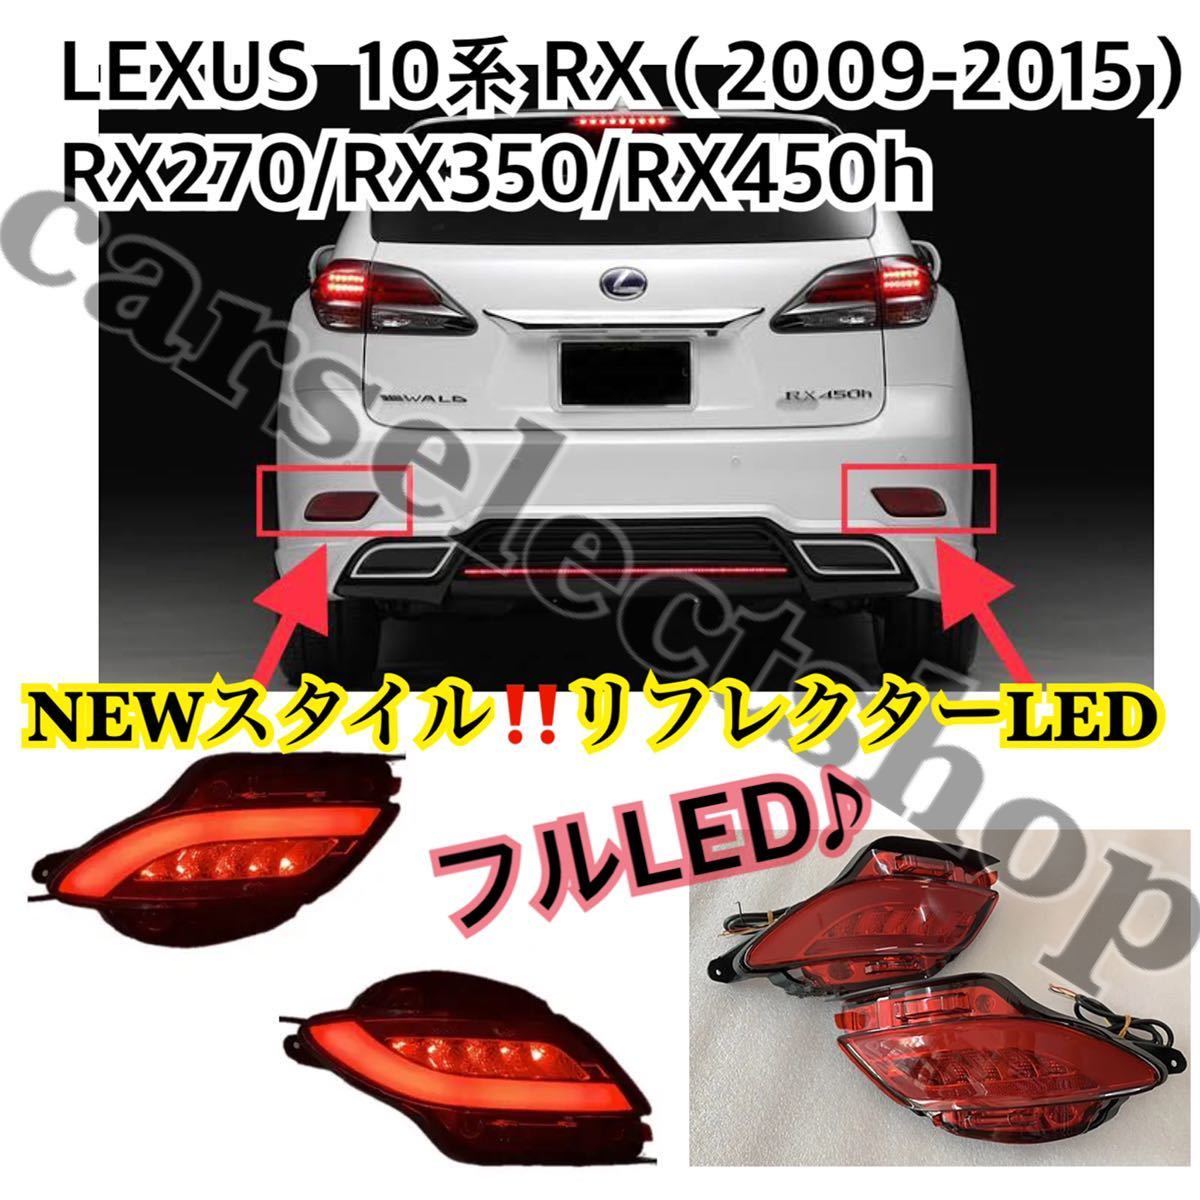 NEW style *LEXUS 10 series RX reflector LED left right set / full LED/ Lexus /RX270/RX350/RX450h[2009-2015] tail light / tail lamp 